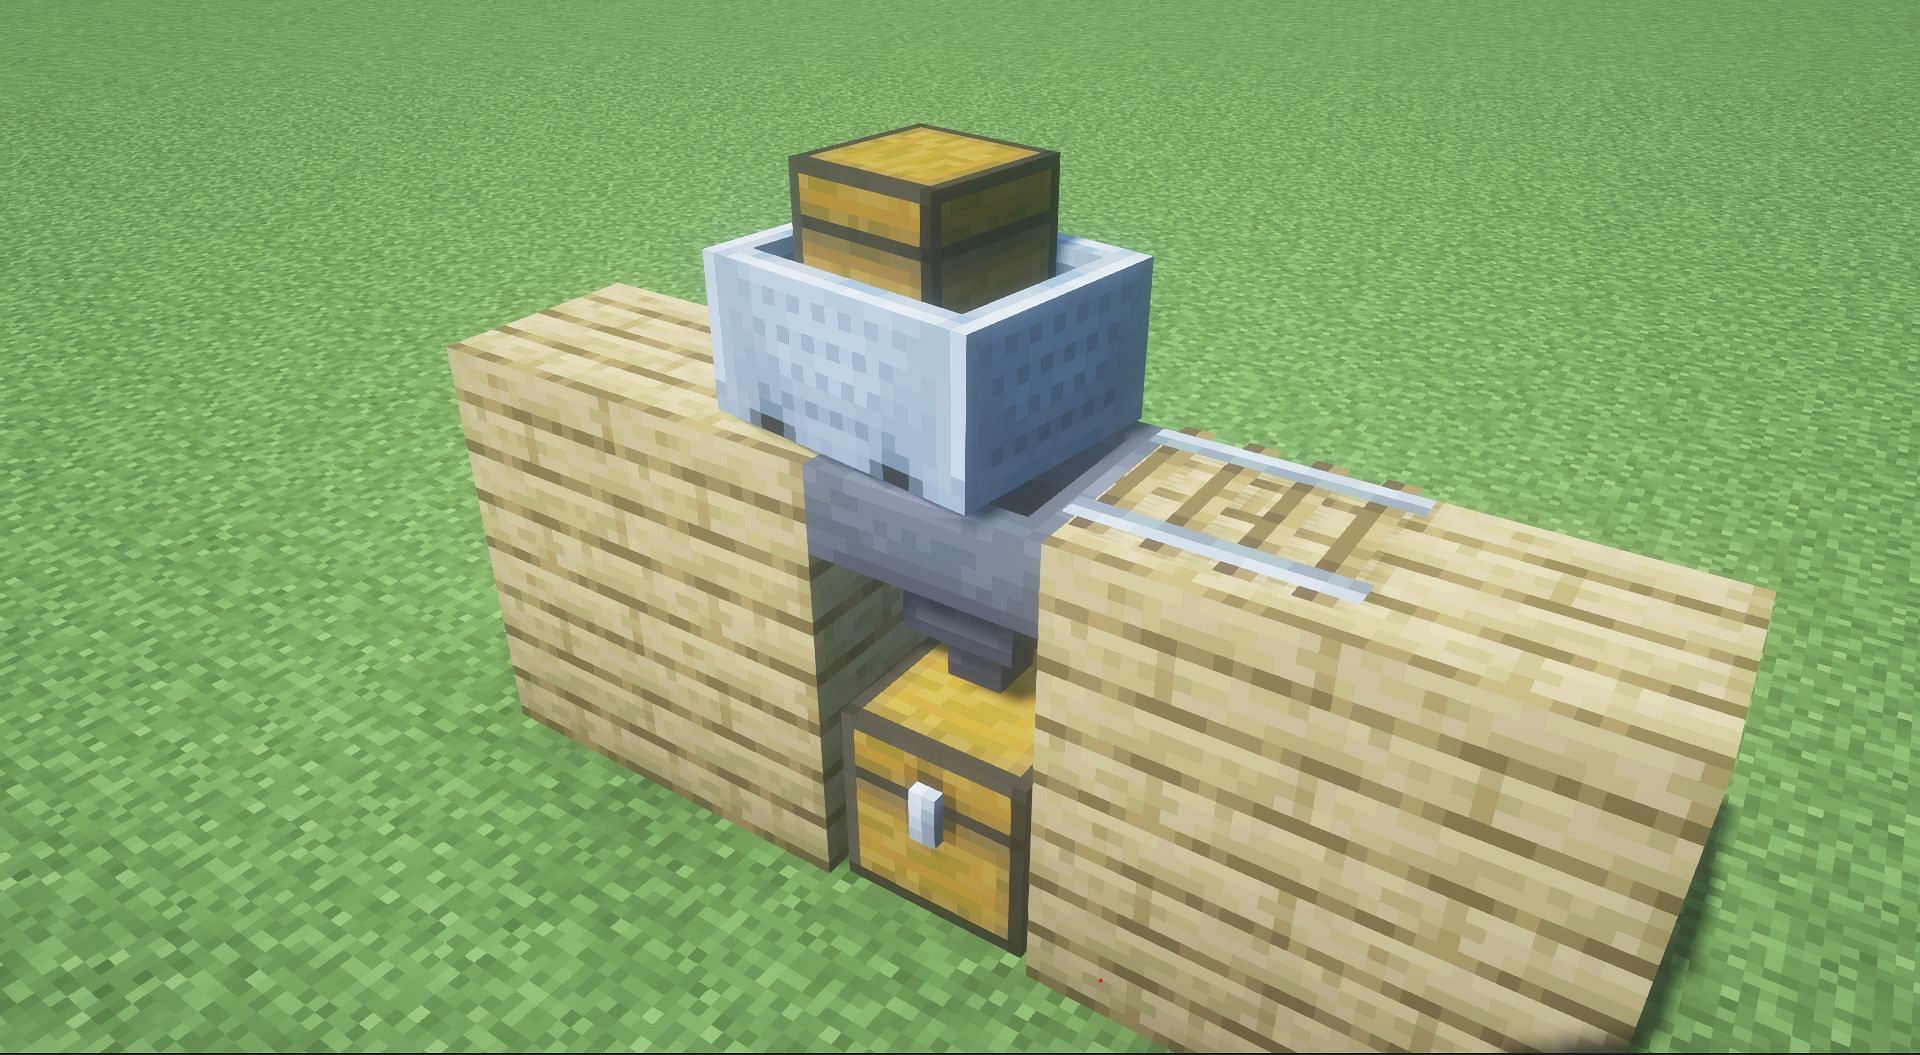 Push the minecart with chest onto the hopper to transfer the item (Image via Mojang)